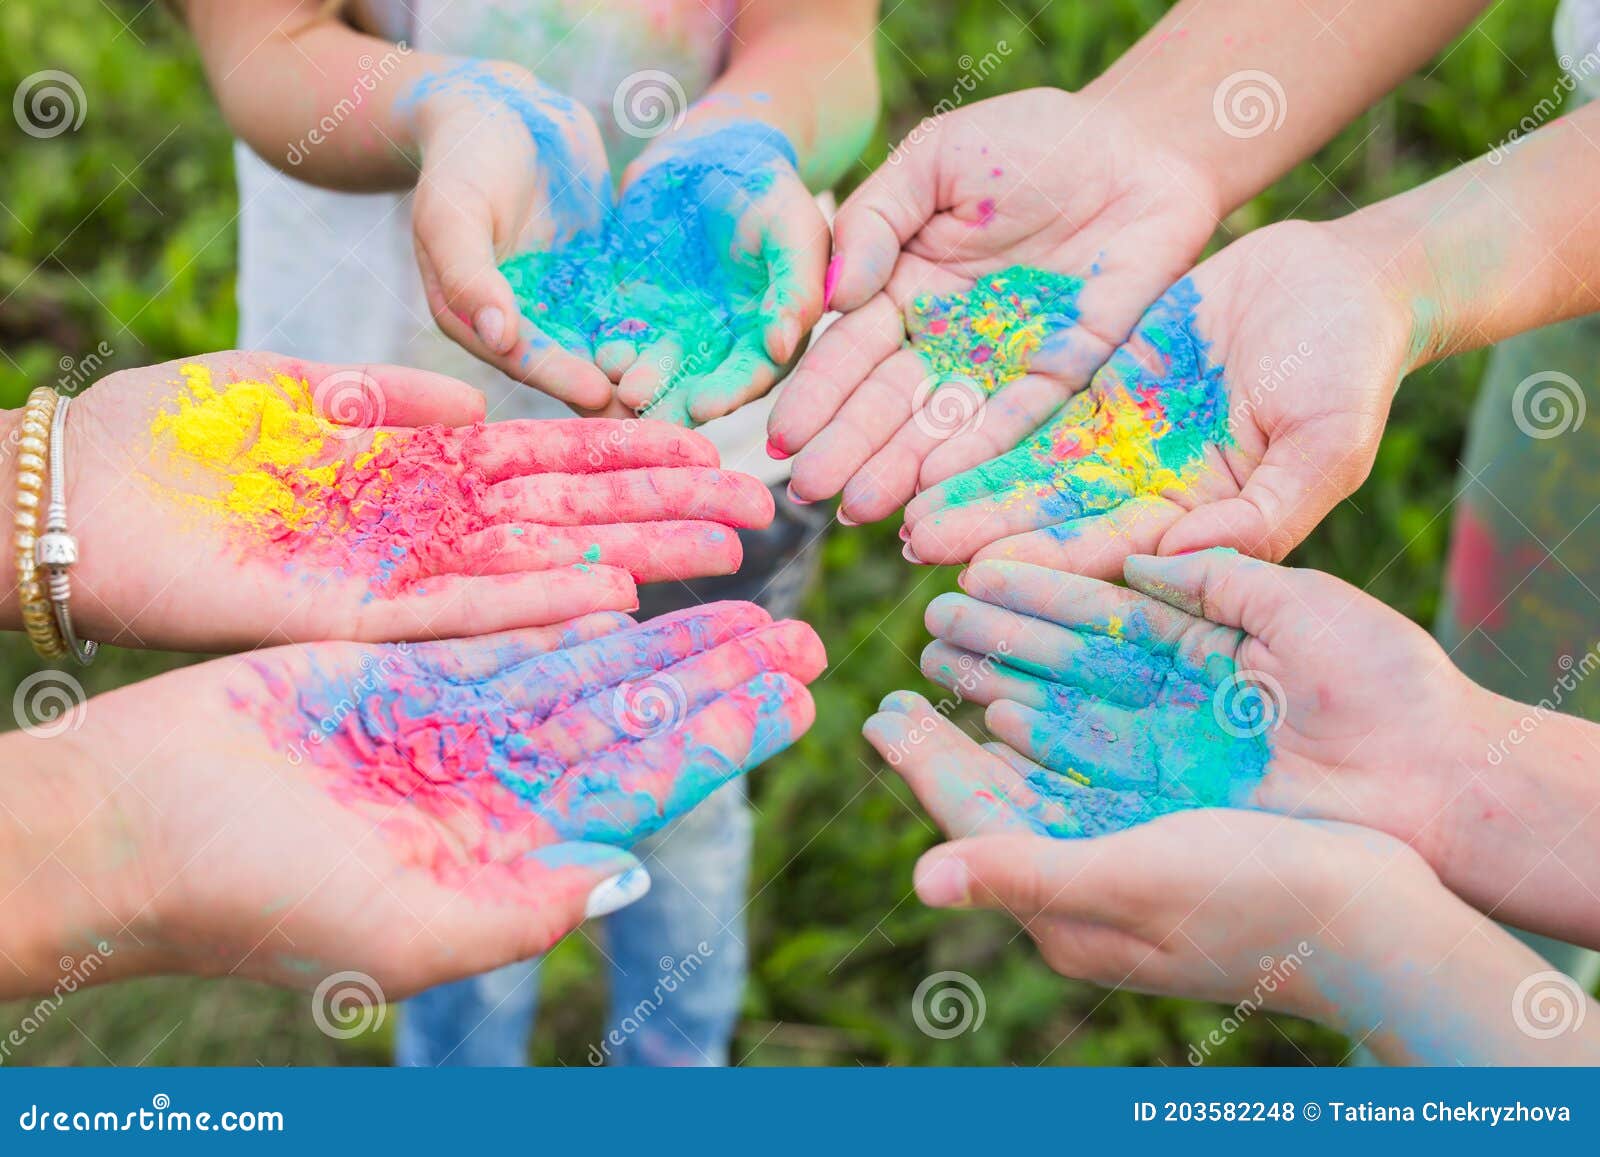 Indian Holidays, Fun and Holi Festival Concept Female Palms Covered